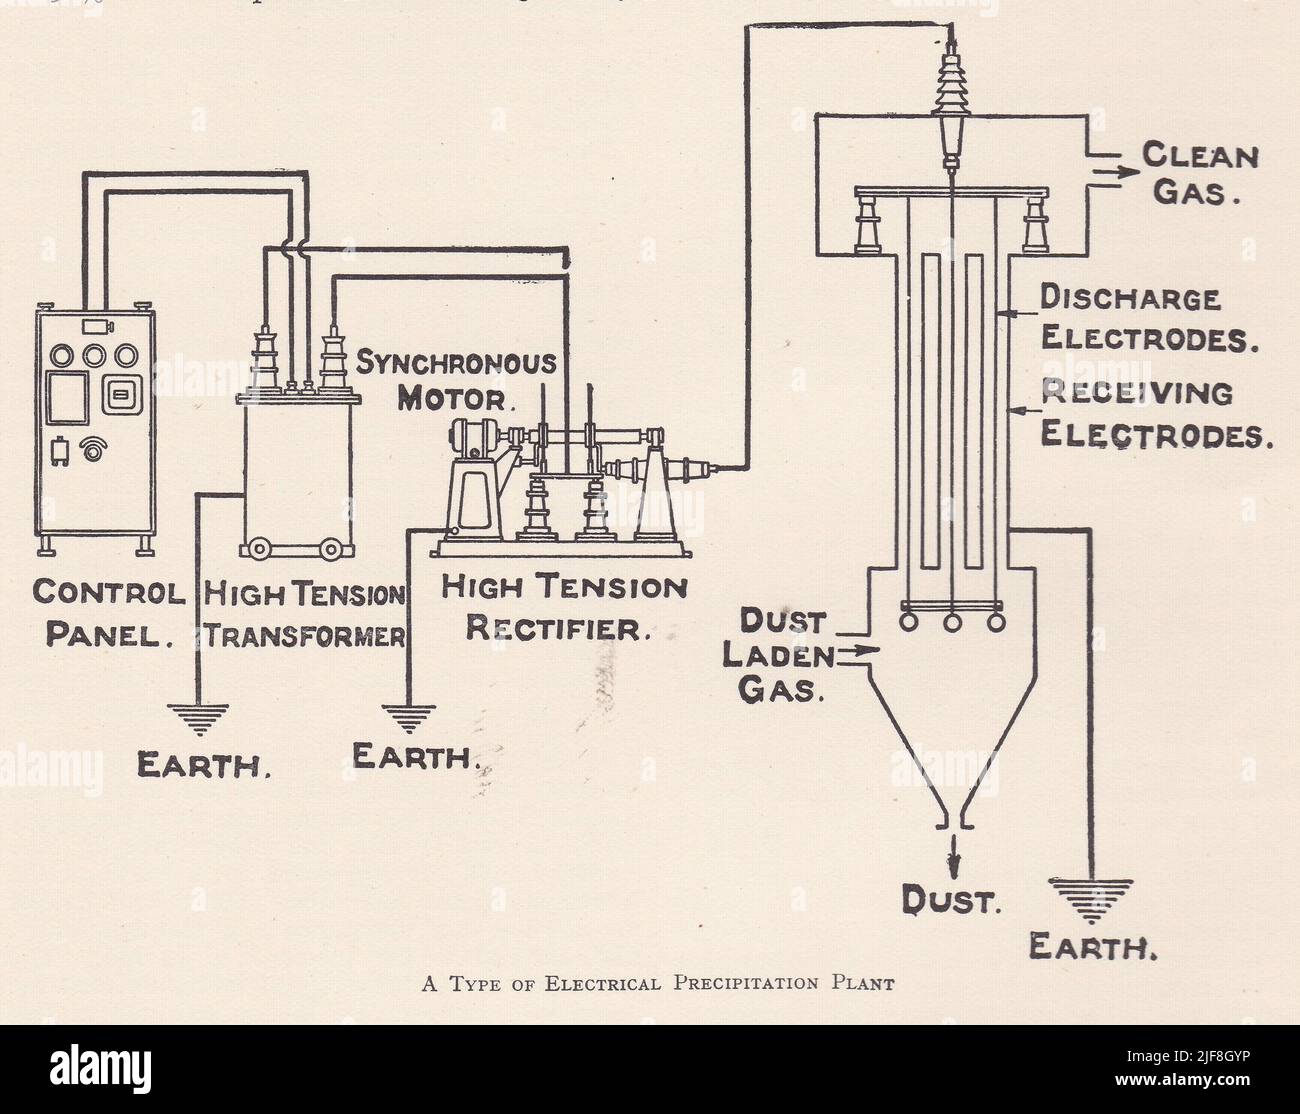 Vintage diagram of A Type of Electrical Precipitation Plant Stock Photo